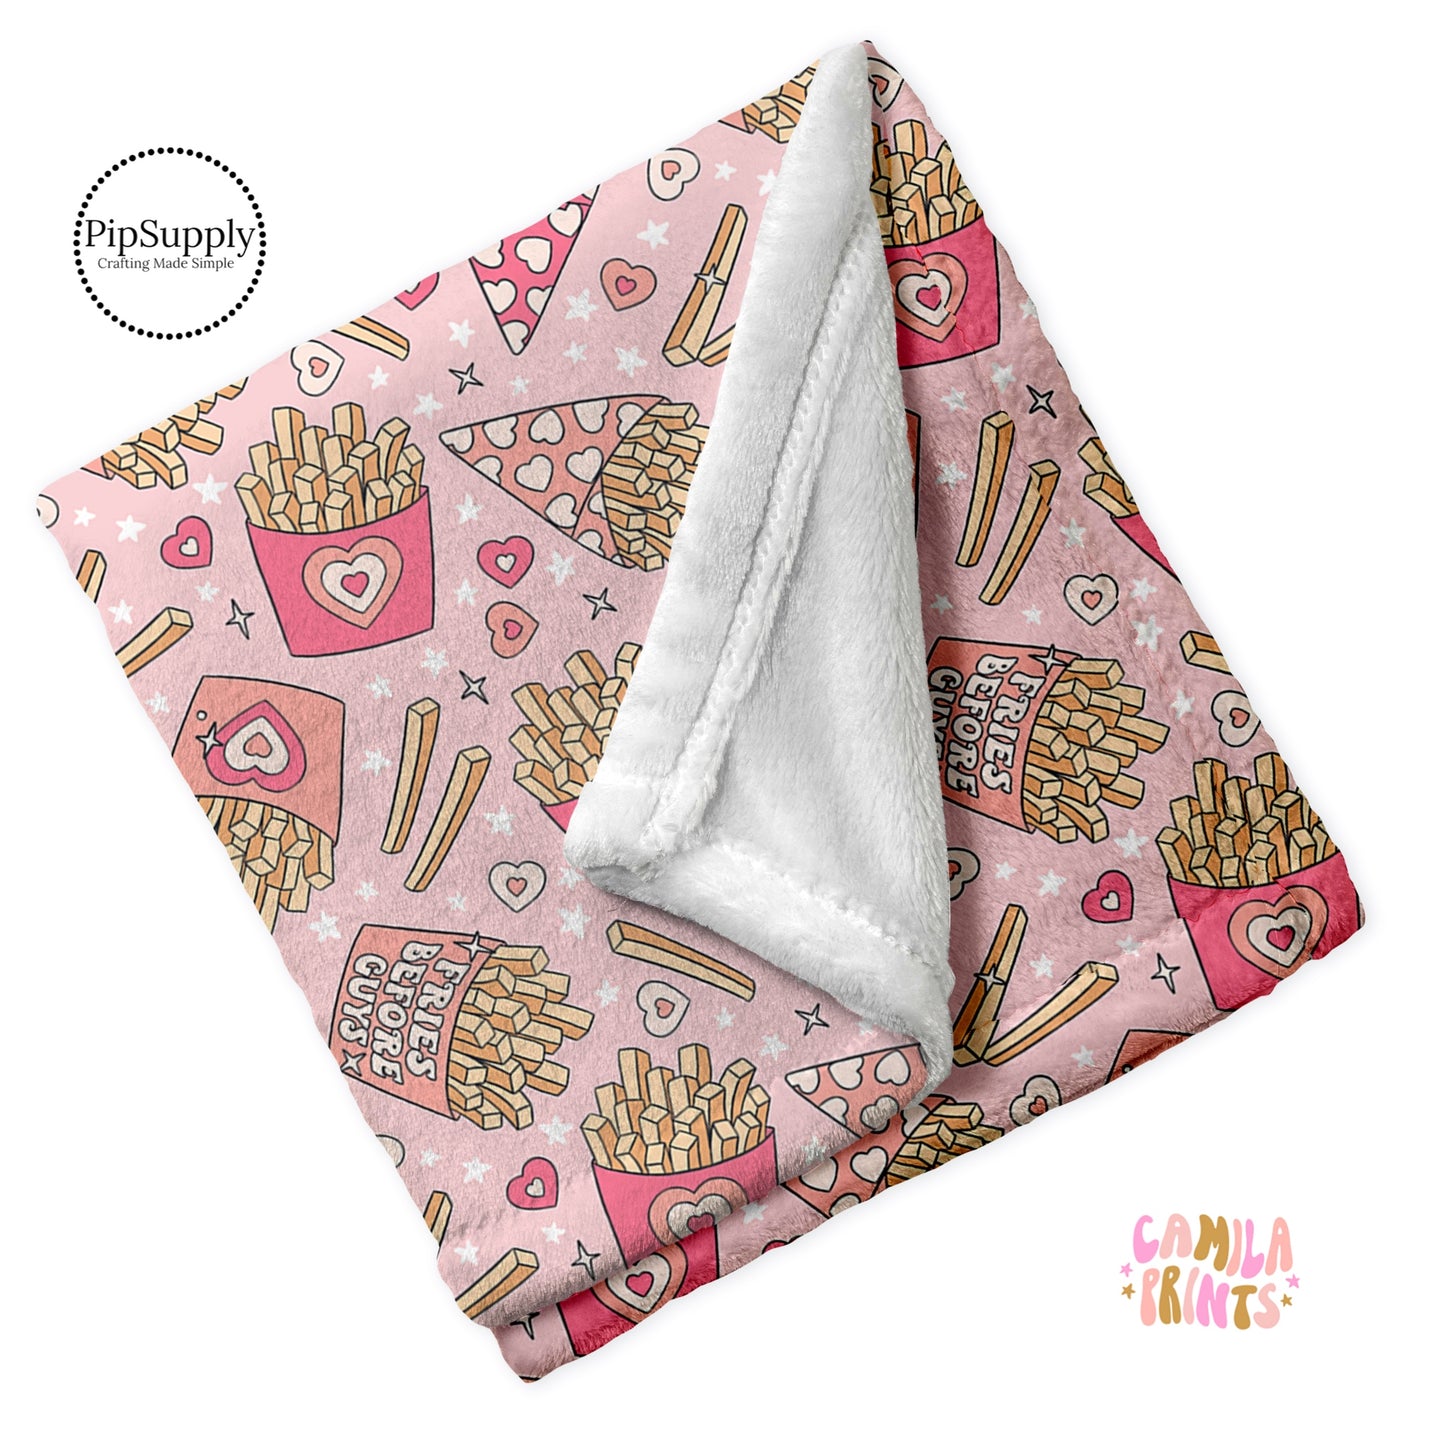 Folded Light Pink plush fur blanket with design of hearts and french fries with "Fries before guys" saying.